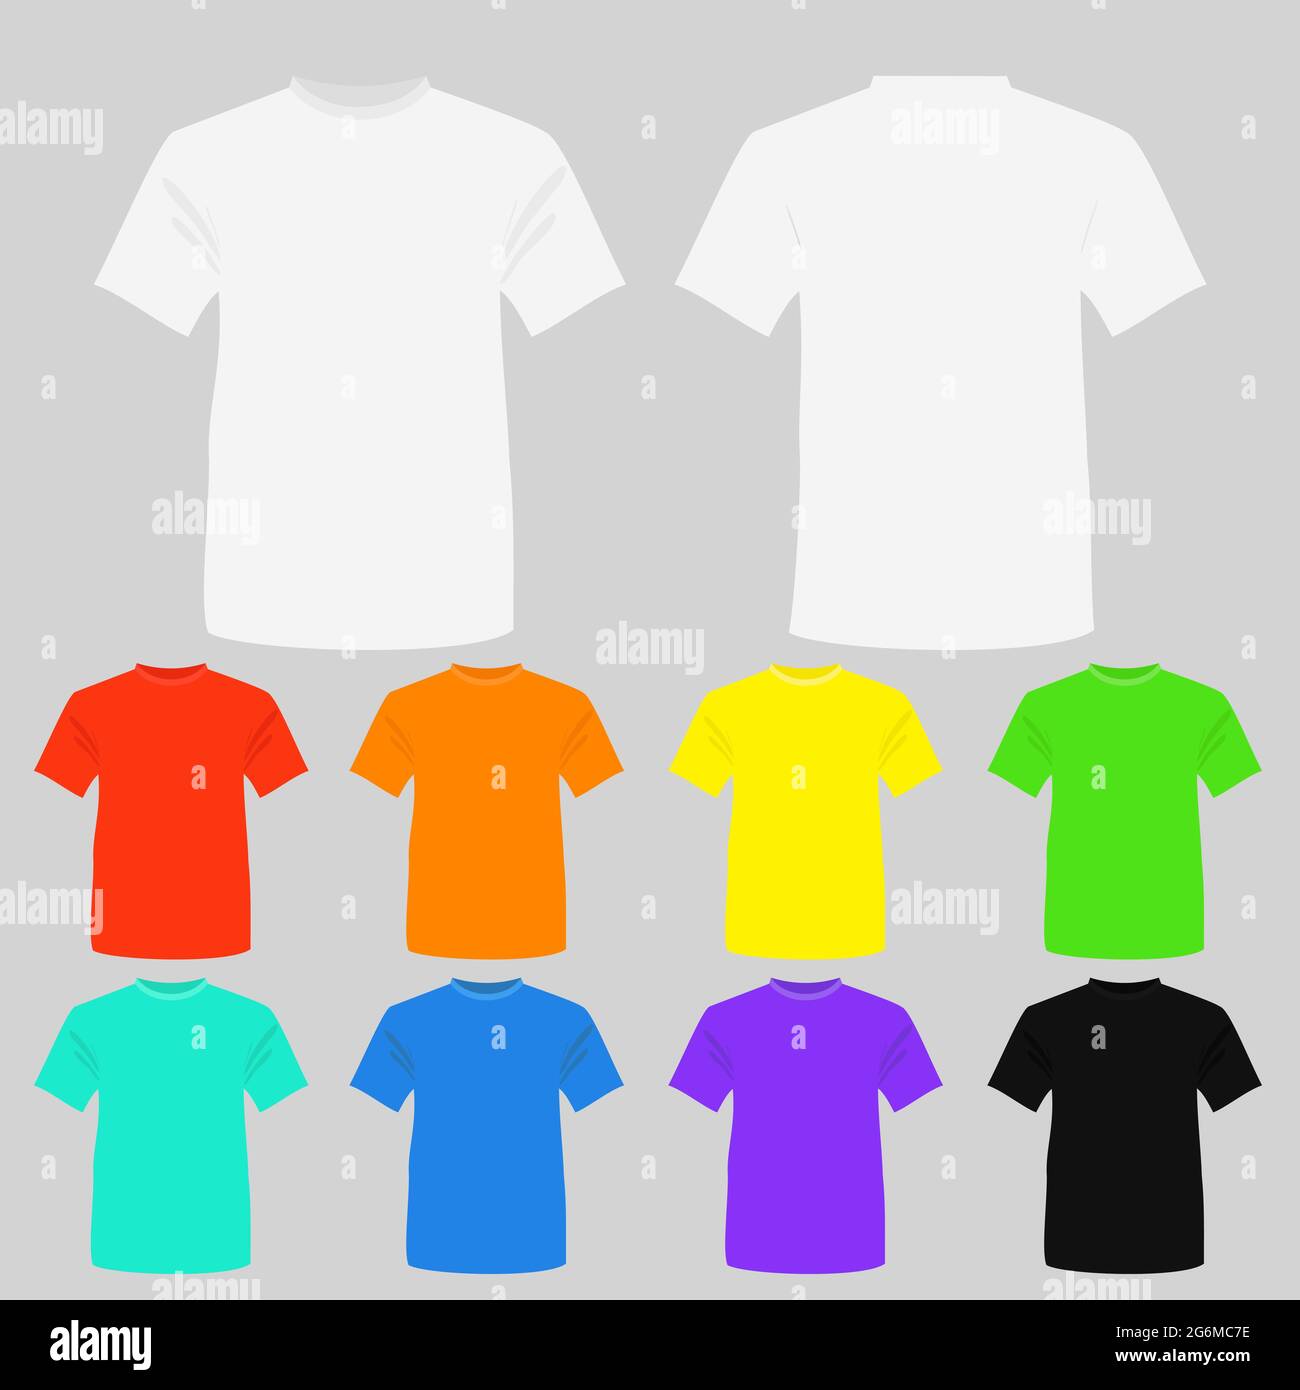 Vector illustration set of templates colored t-shirts. T-shirts in white, black and other bright colors in flat style. Stock Vector